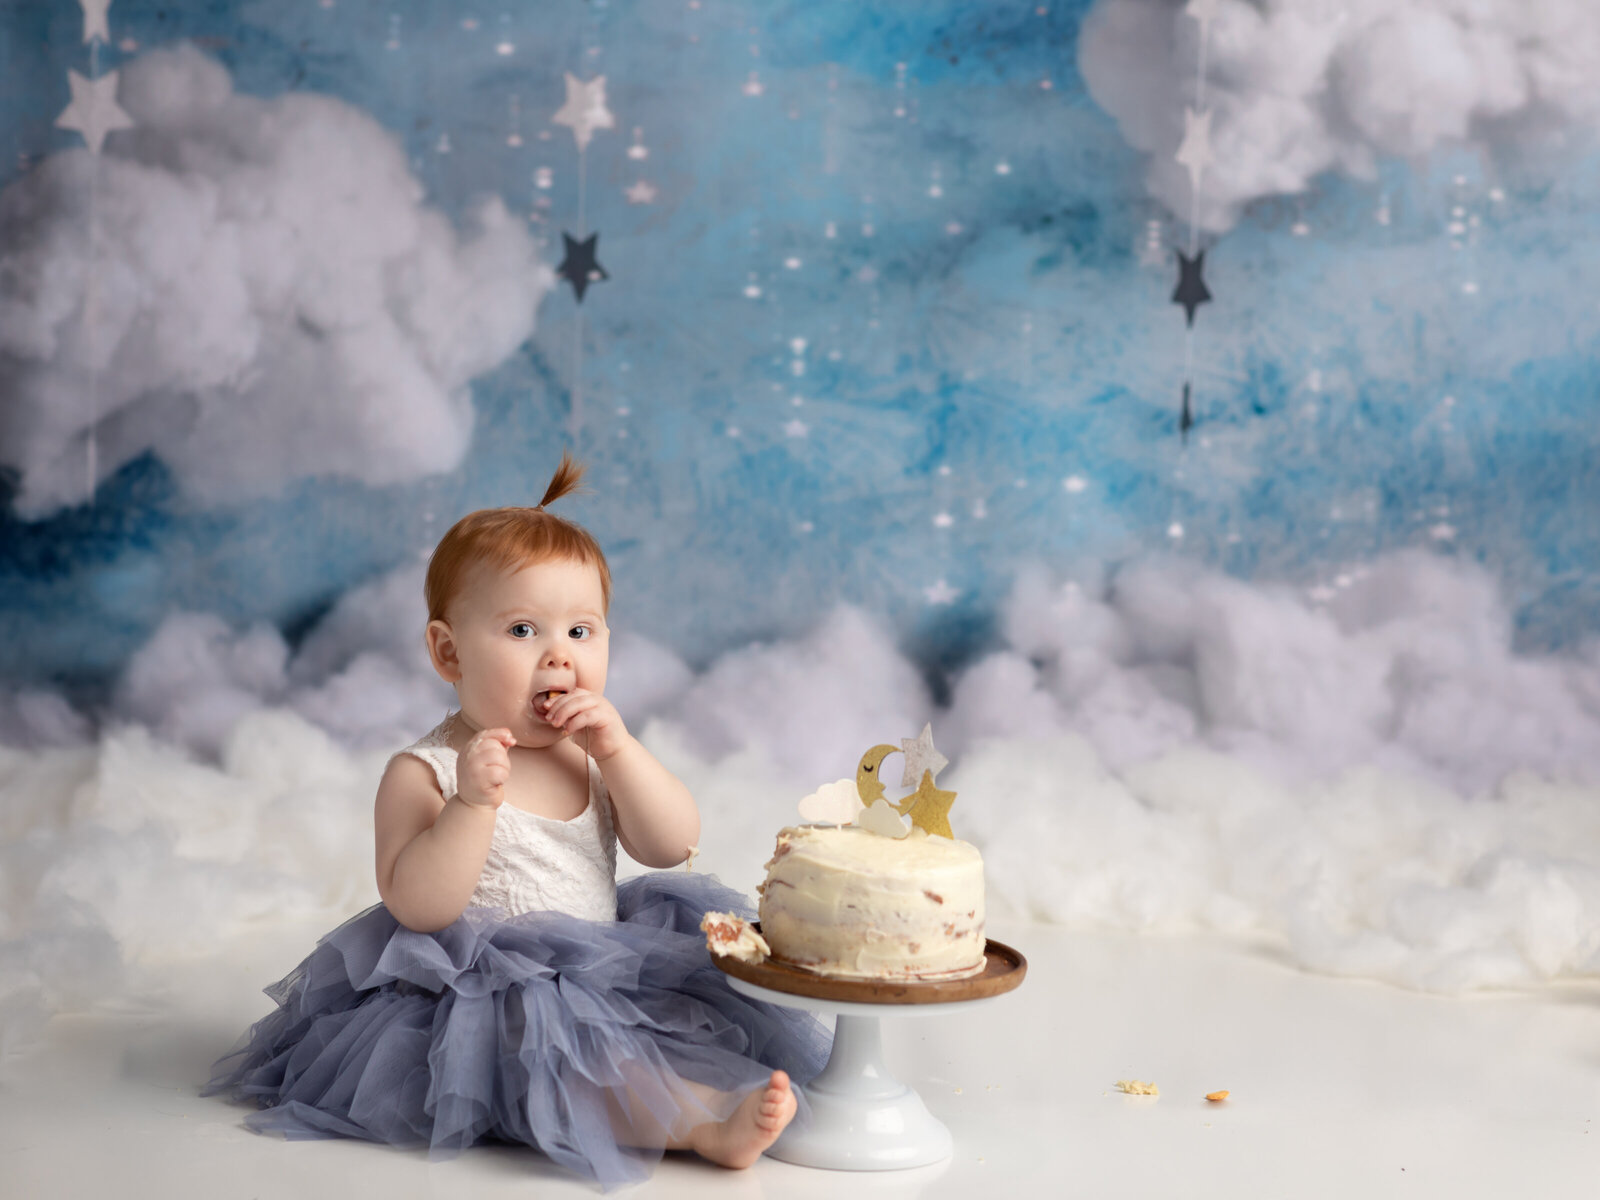 twinkle twinkle little star cake smash theme for first birthday photoshoot